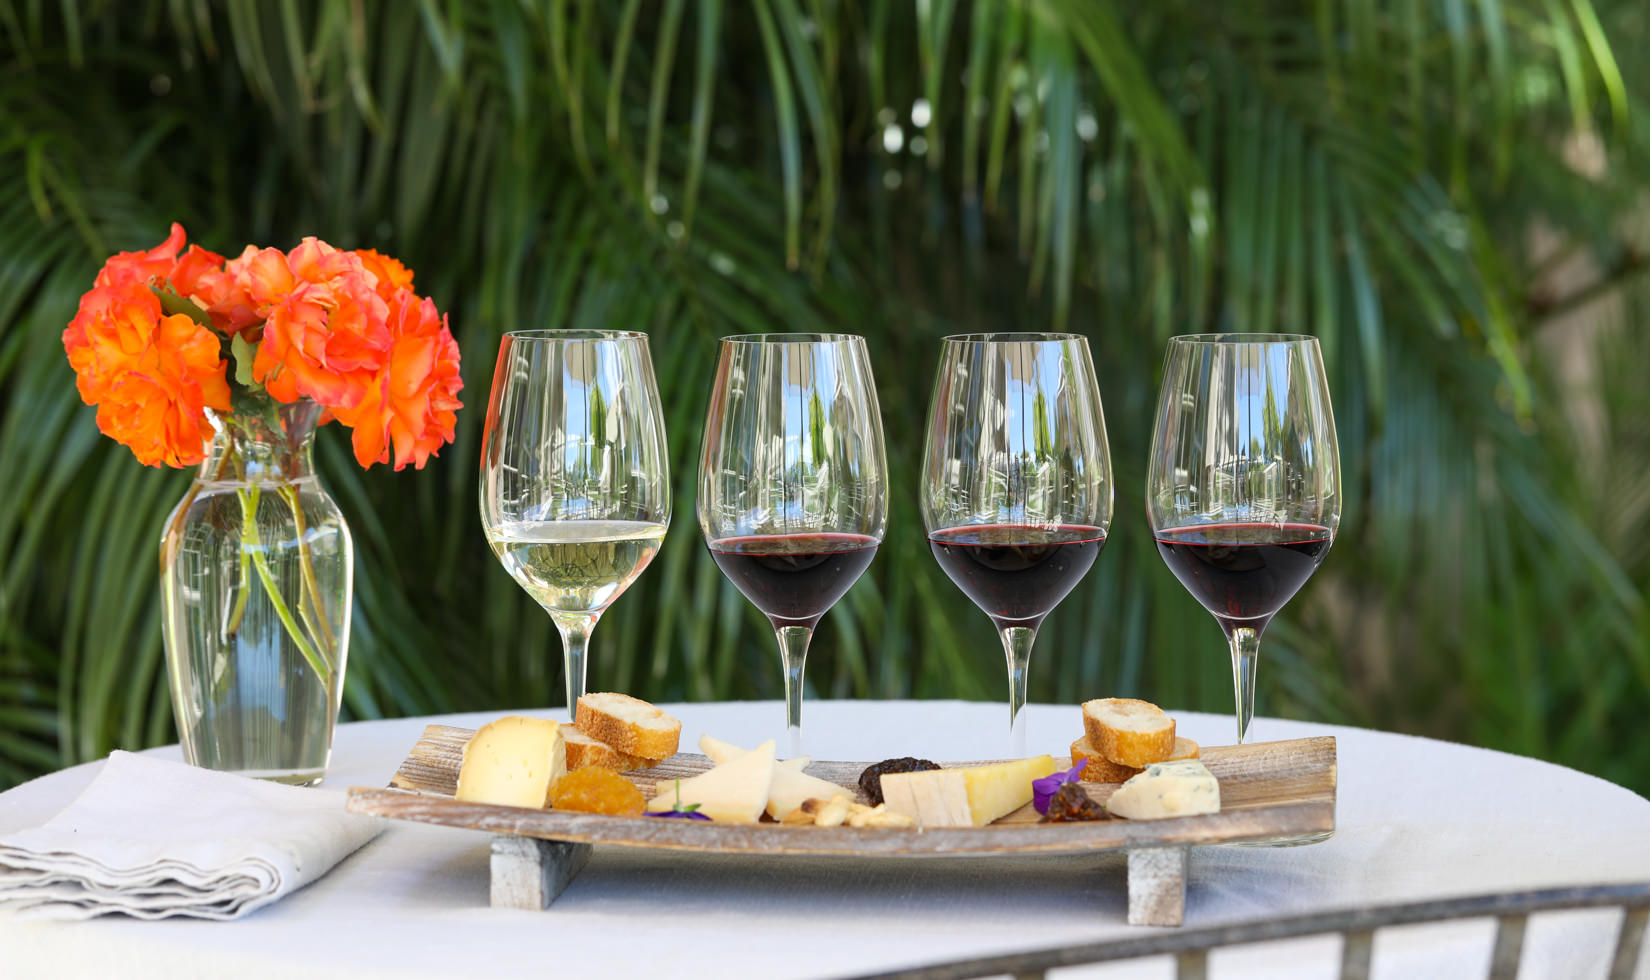 4 wine glasses with wine and cheese varieties in the table